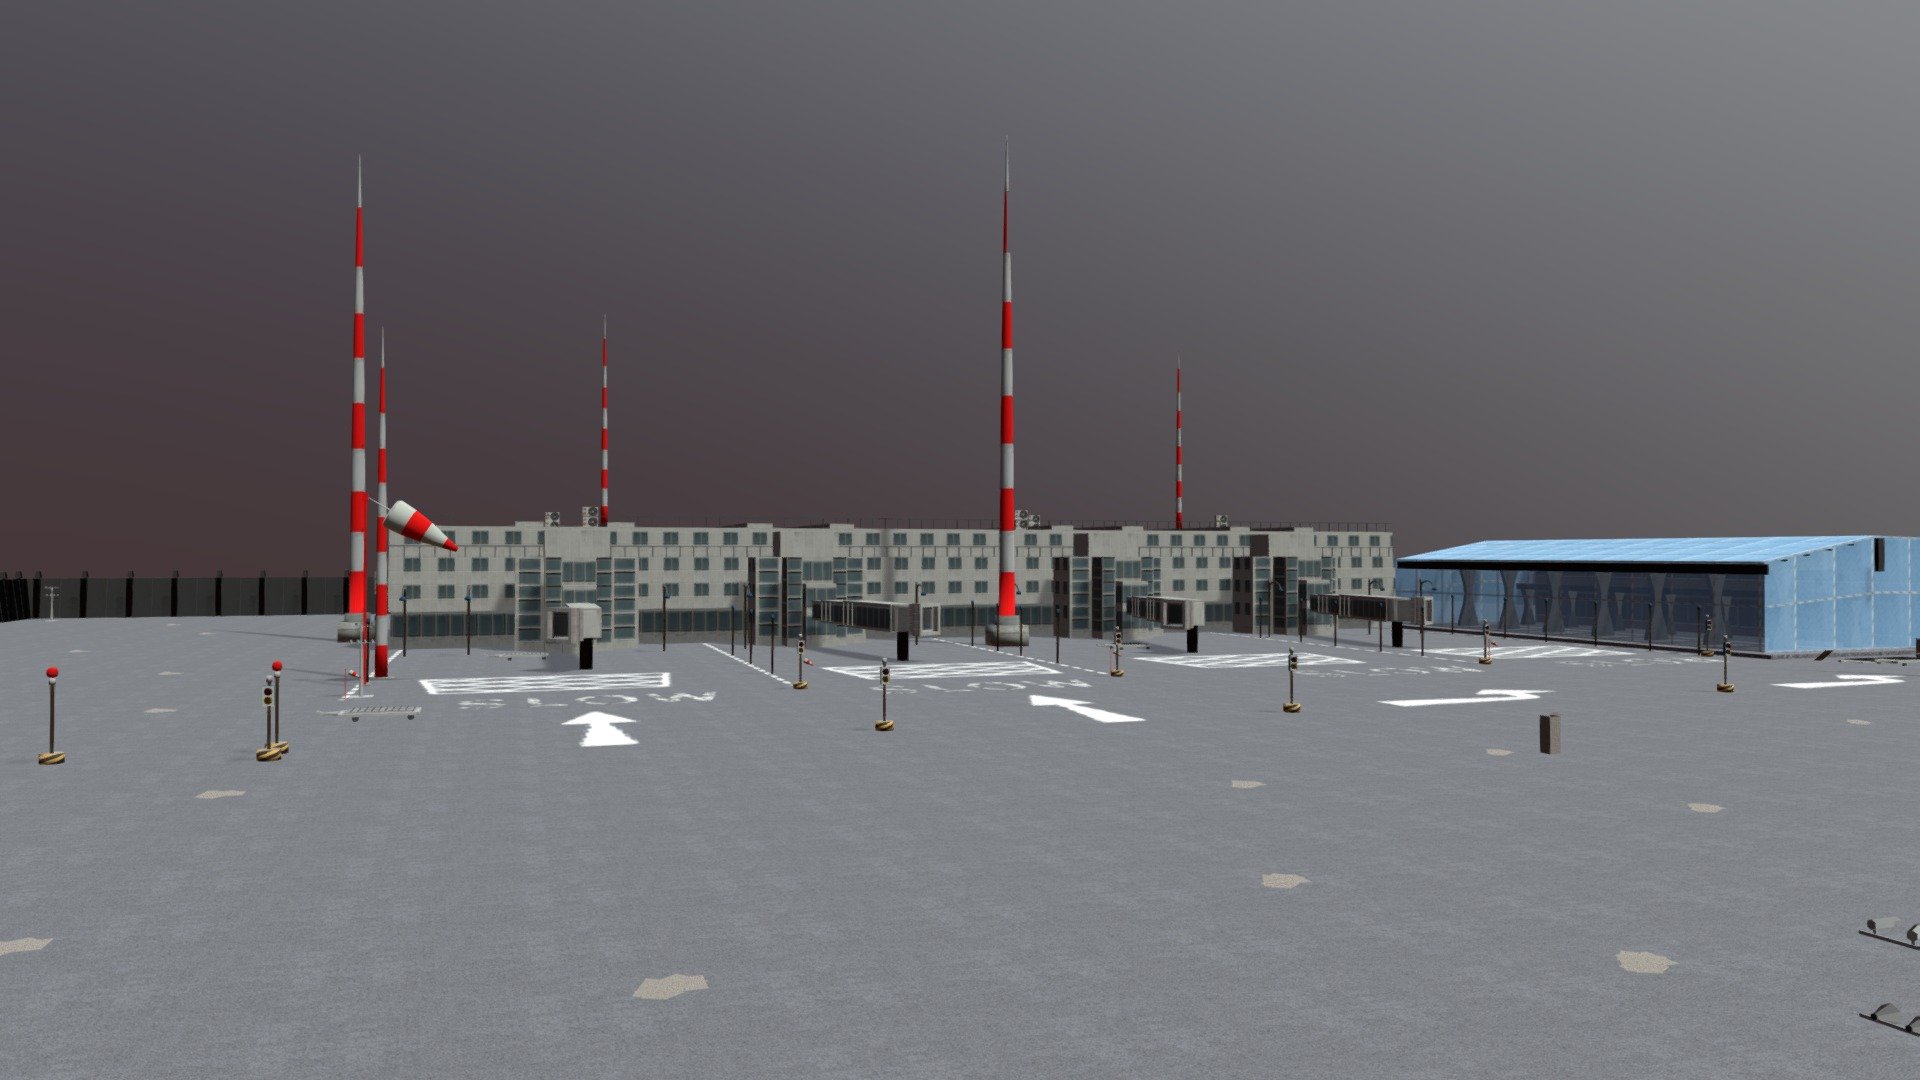 Air Port Mobile Game Environment 
Low poly game environment for mobile games modeled in blender and texture in photoshop, Set up in unity after creating of Prefab - Air Port Mobile Game Environment - 3D model by Muhammad Awais Gul (@MuhammadAwaisGul) 3d model